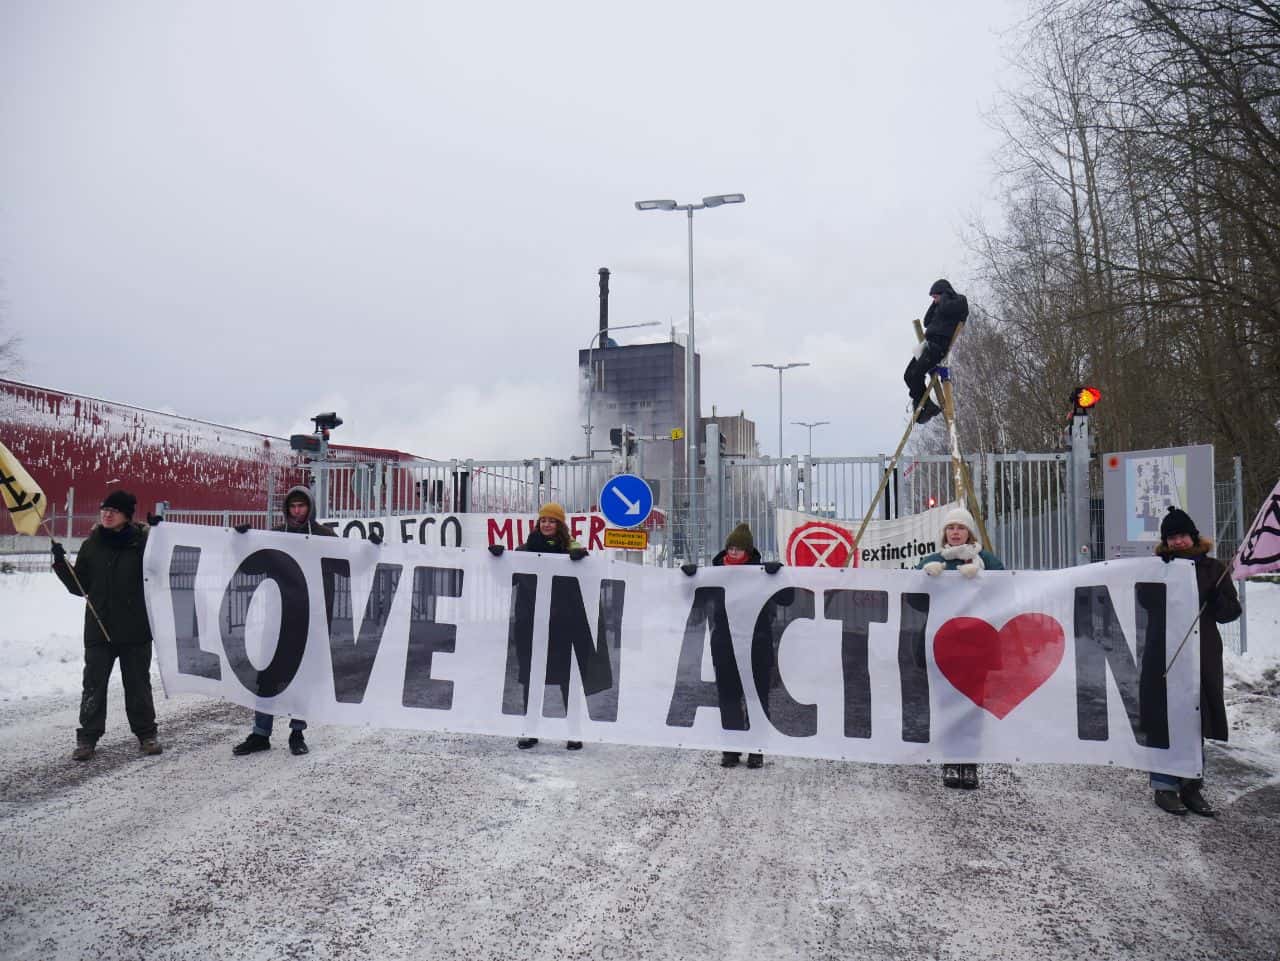 Rebels hold a banner that says Love In Action on a snowy road into a pulp mill.